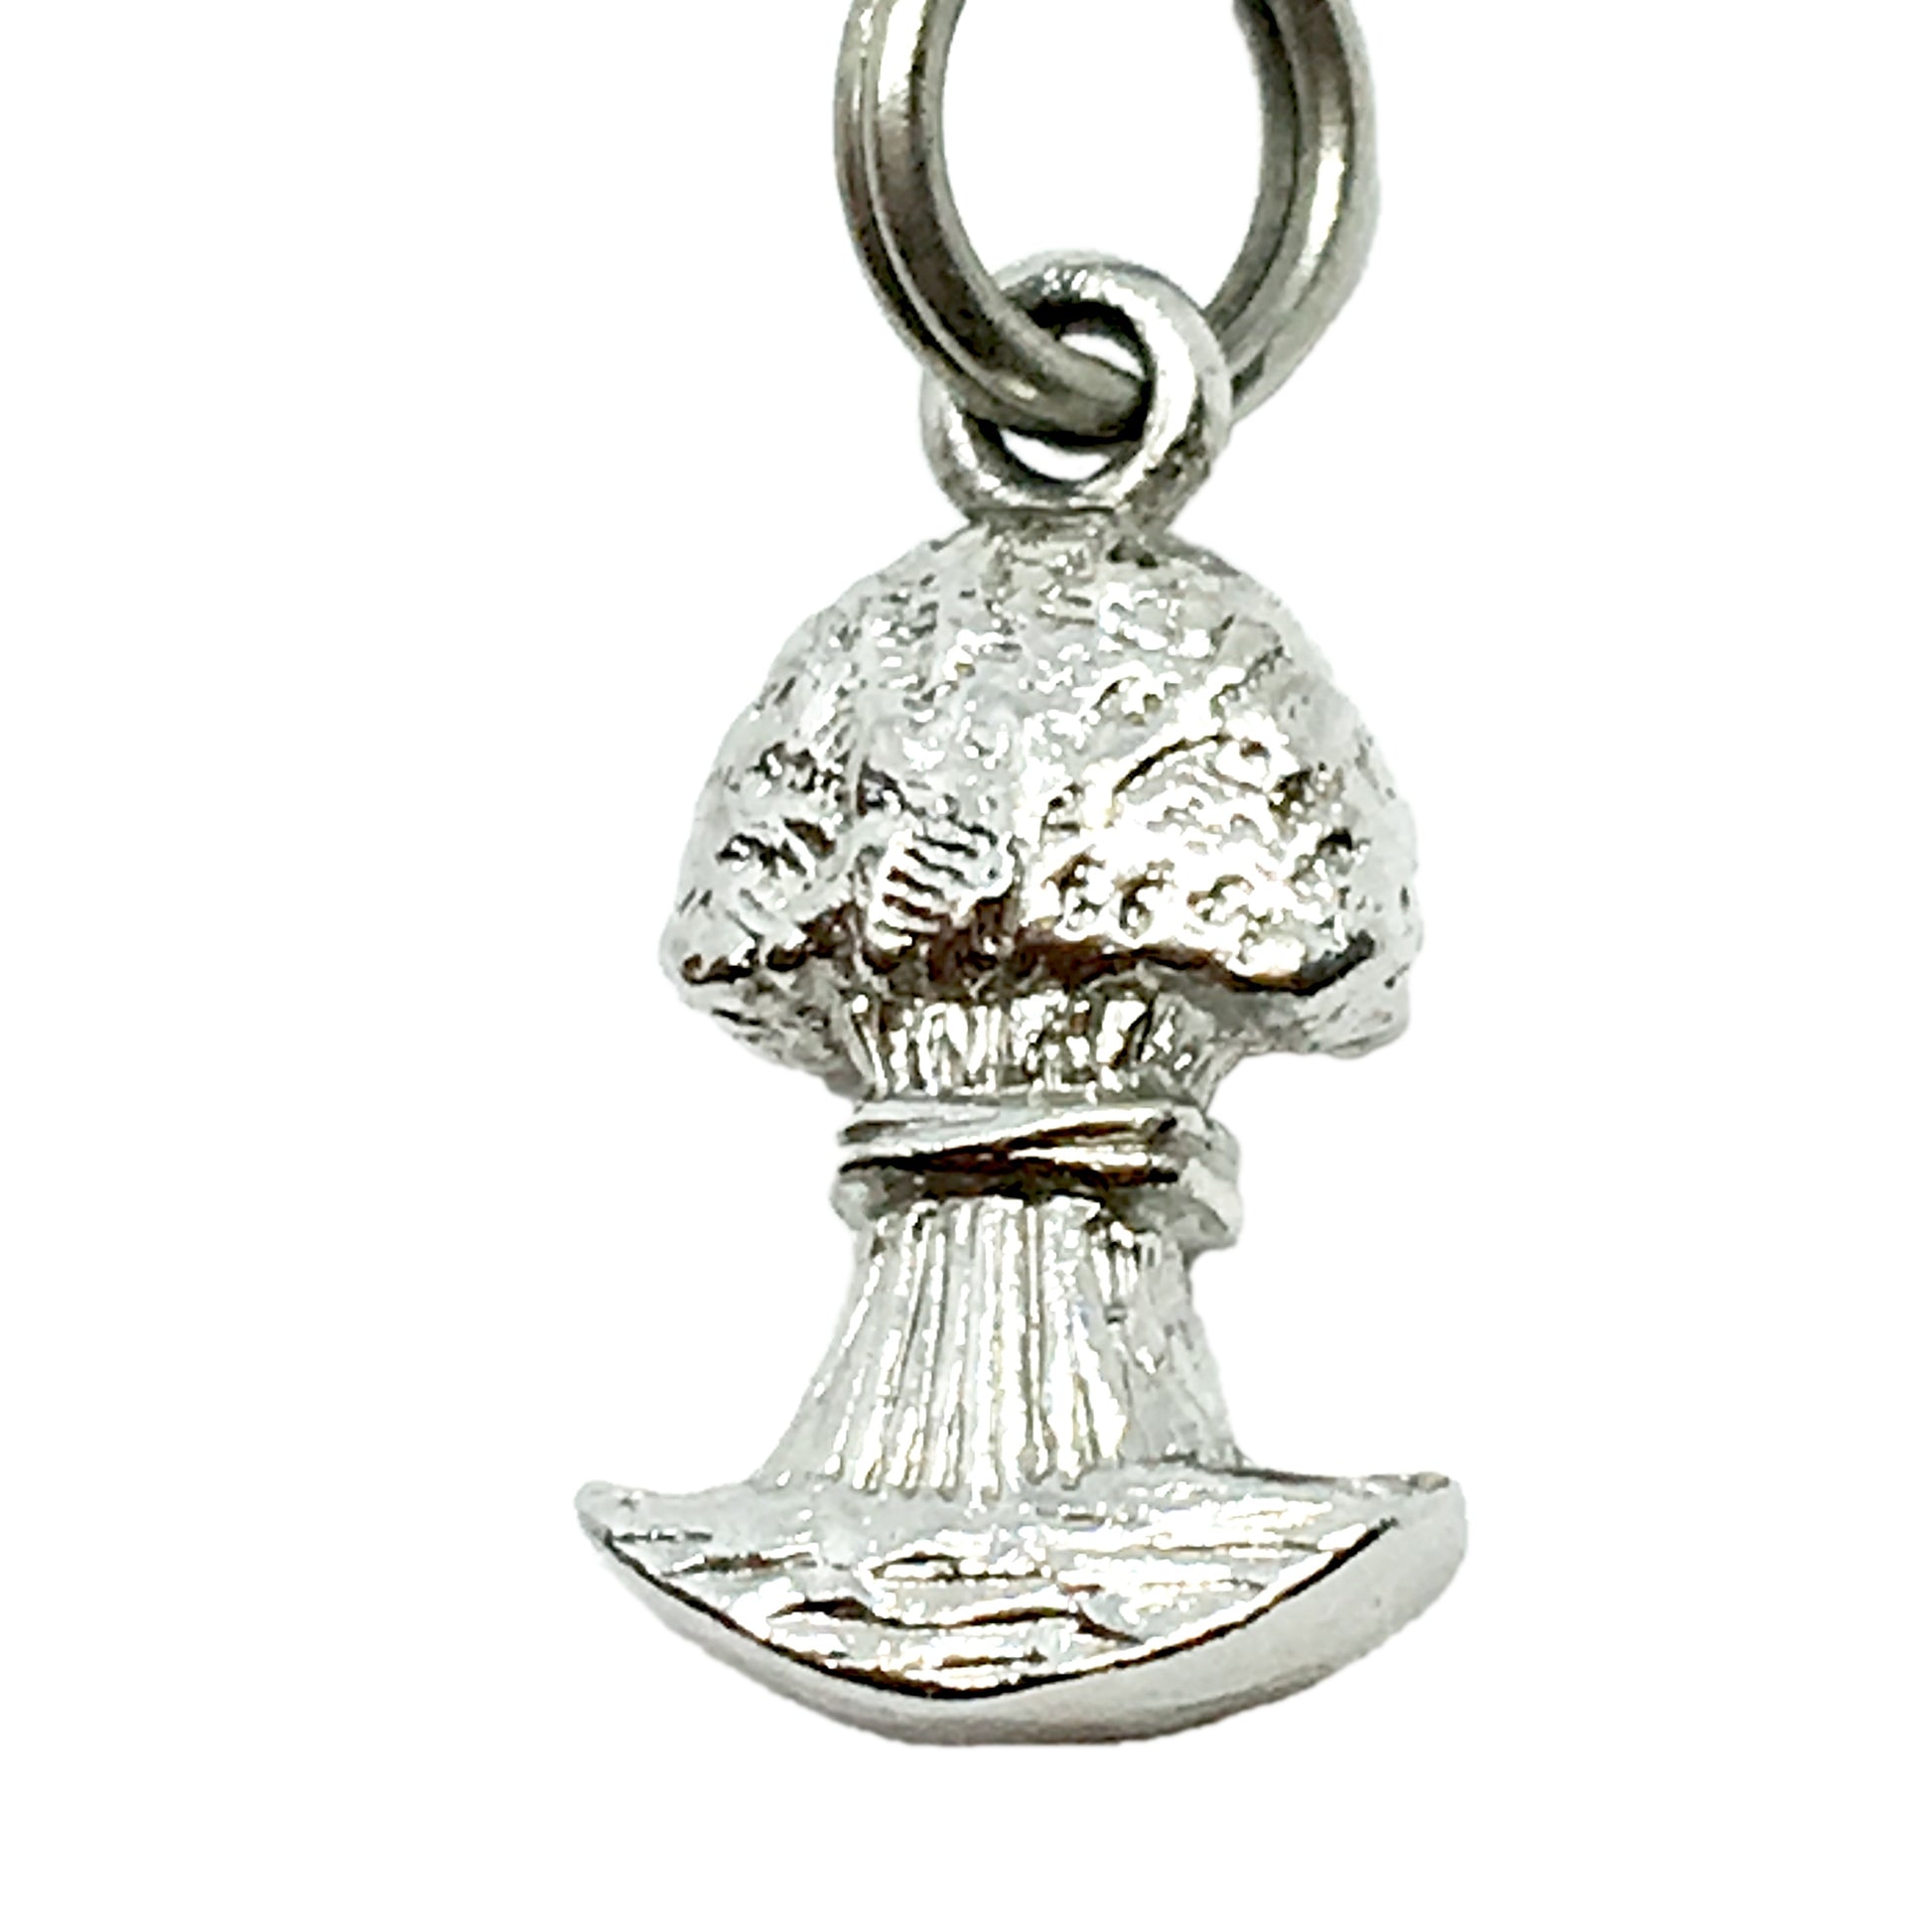 Charm - Vintage Sterling Silver Farmers Harvest Broccoli 3D Charm - Small Tiniest Charm